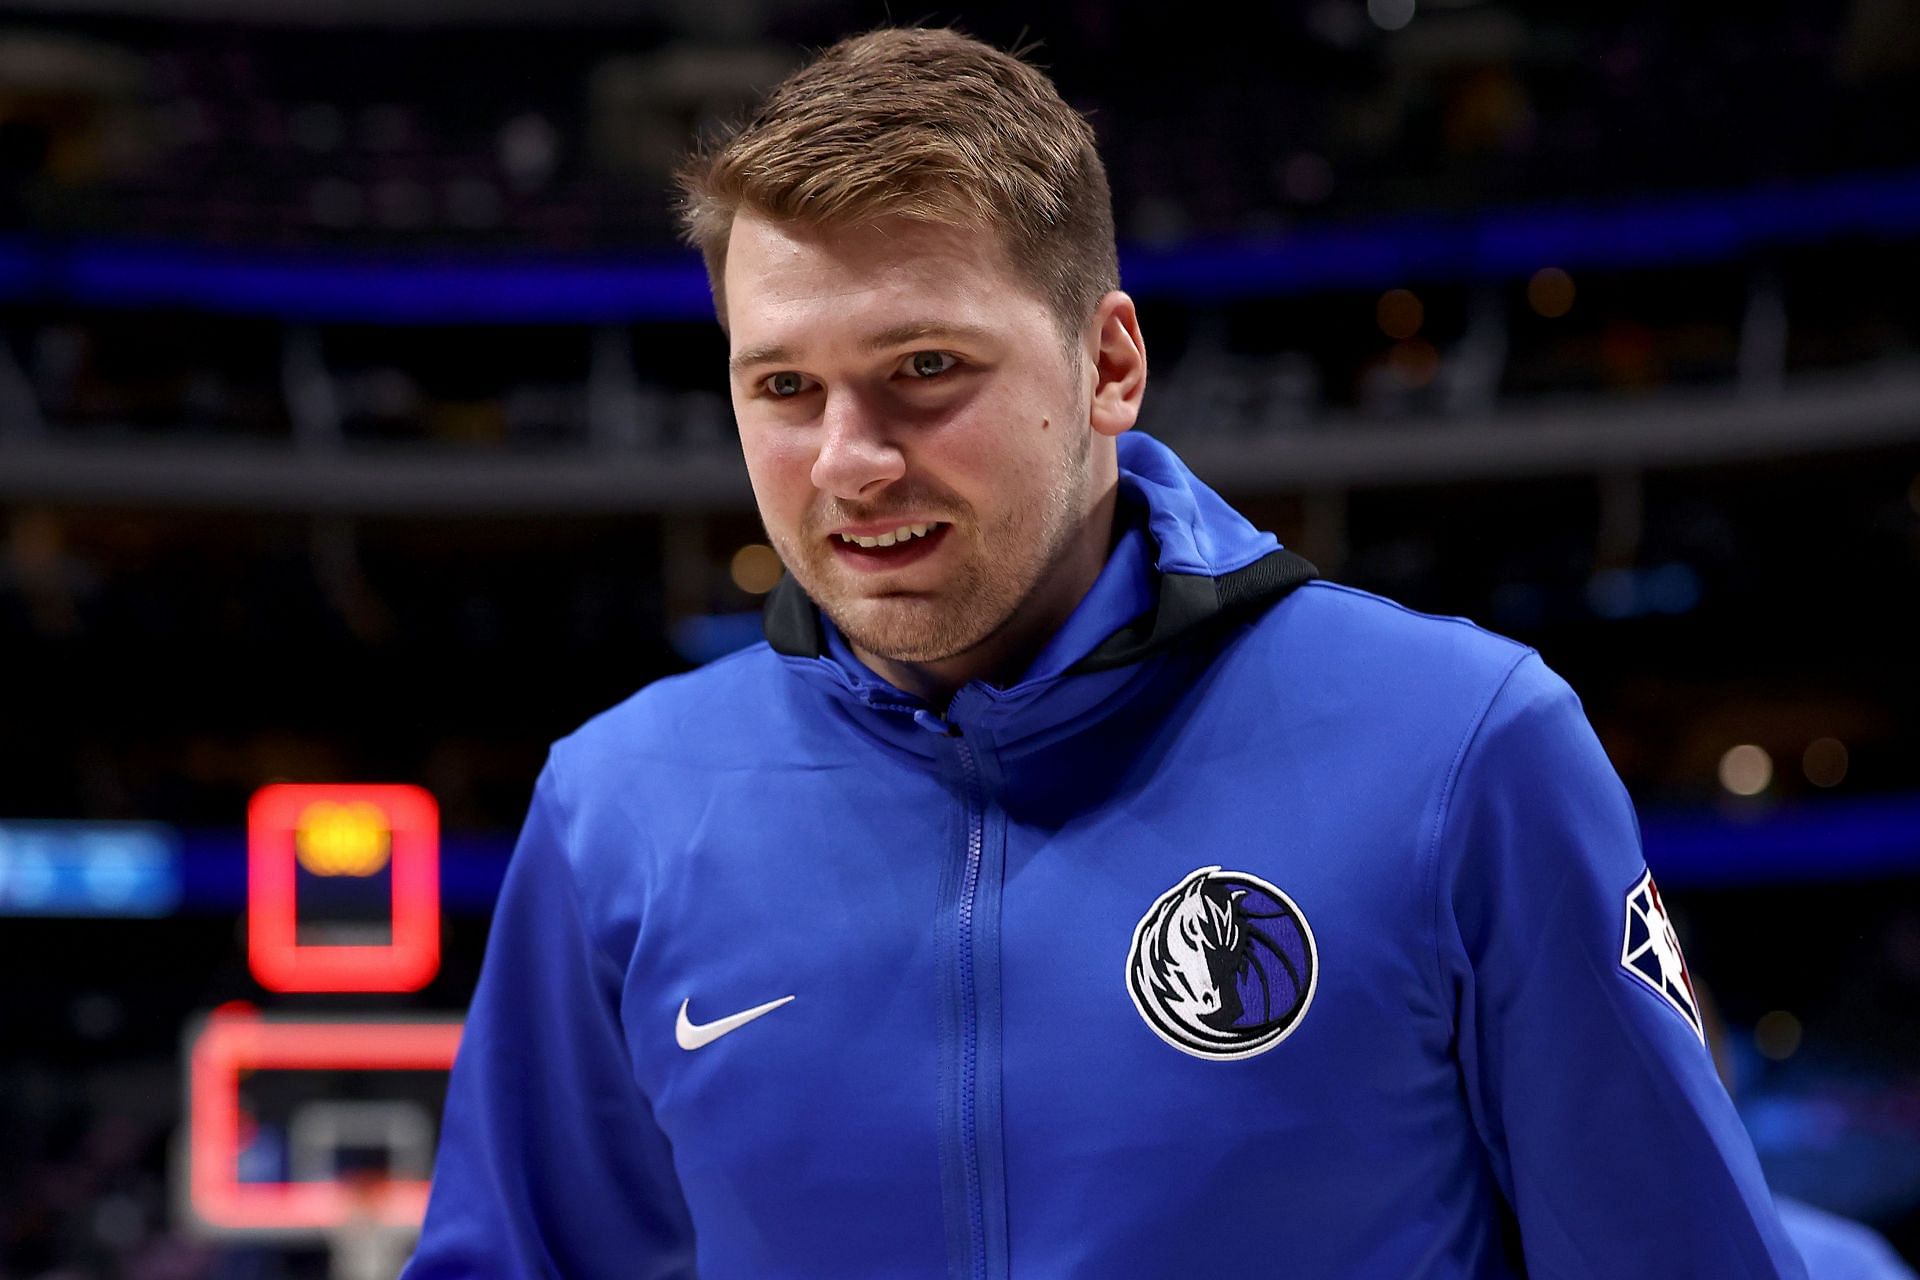 Luka Doncic could become a serious MVP candidate this year for the Dallas Mavericks